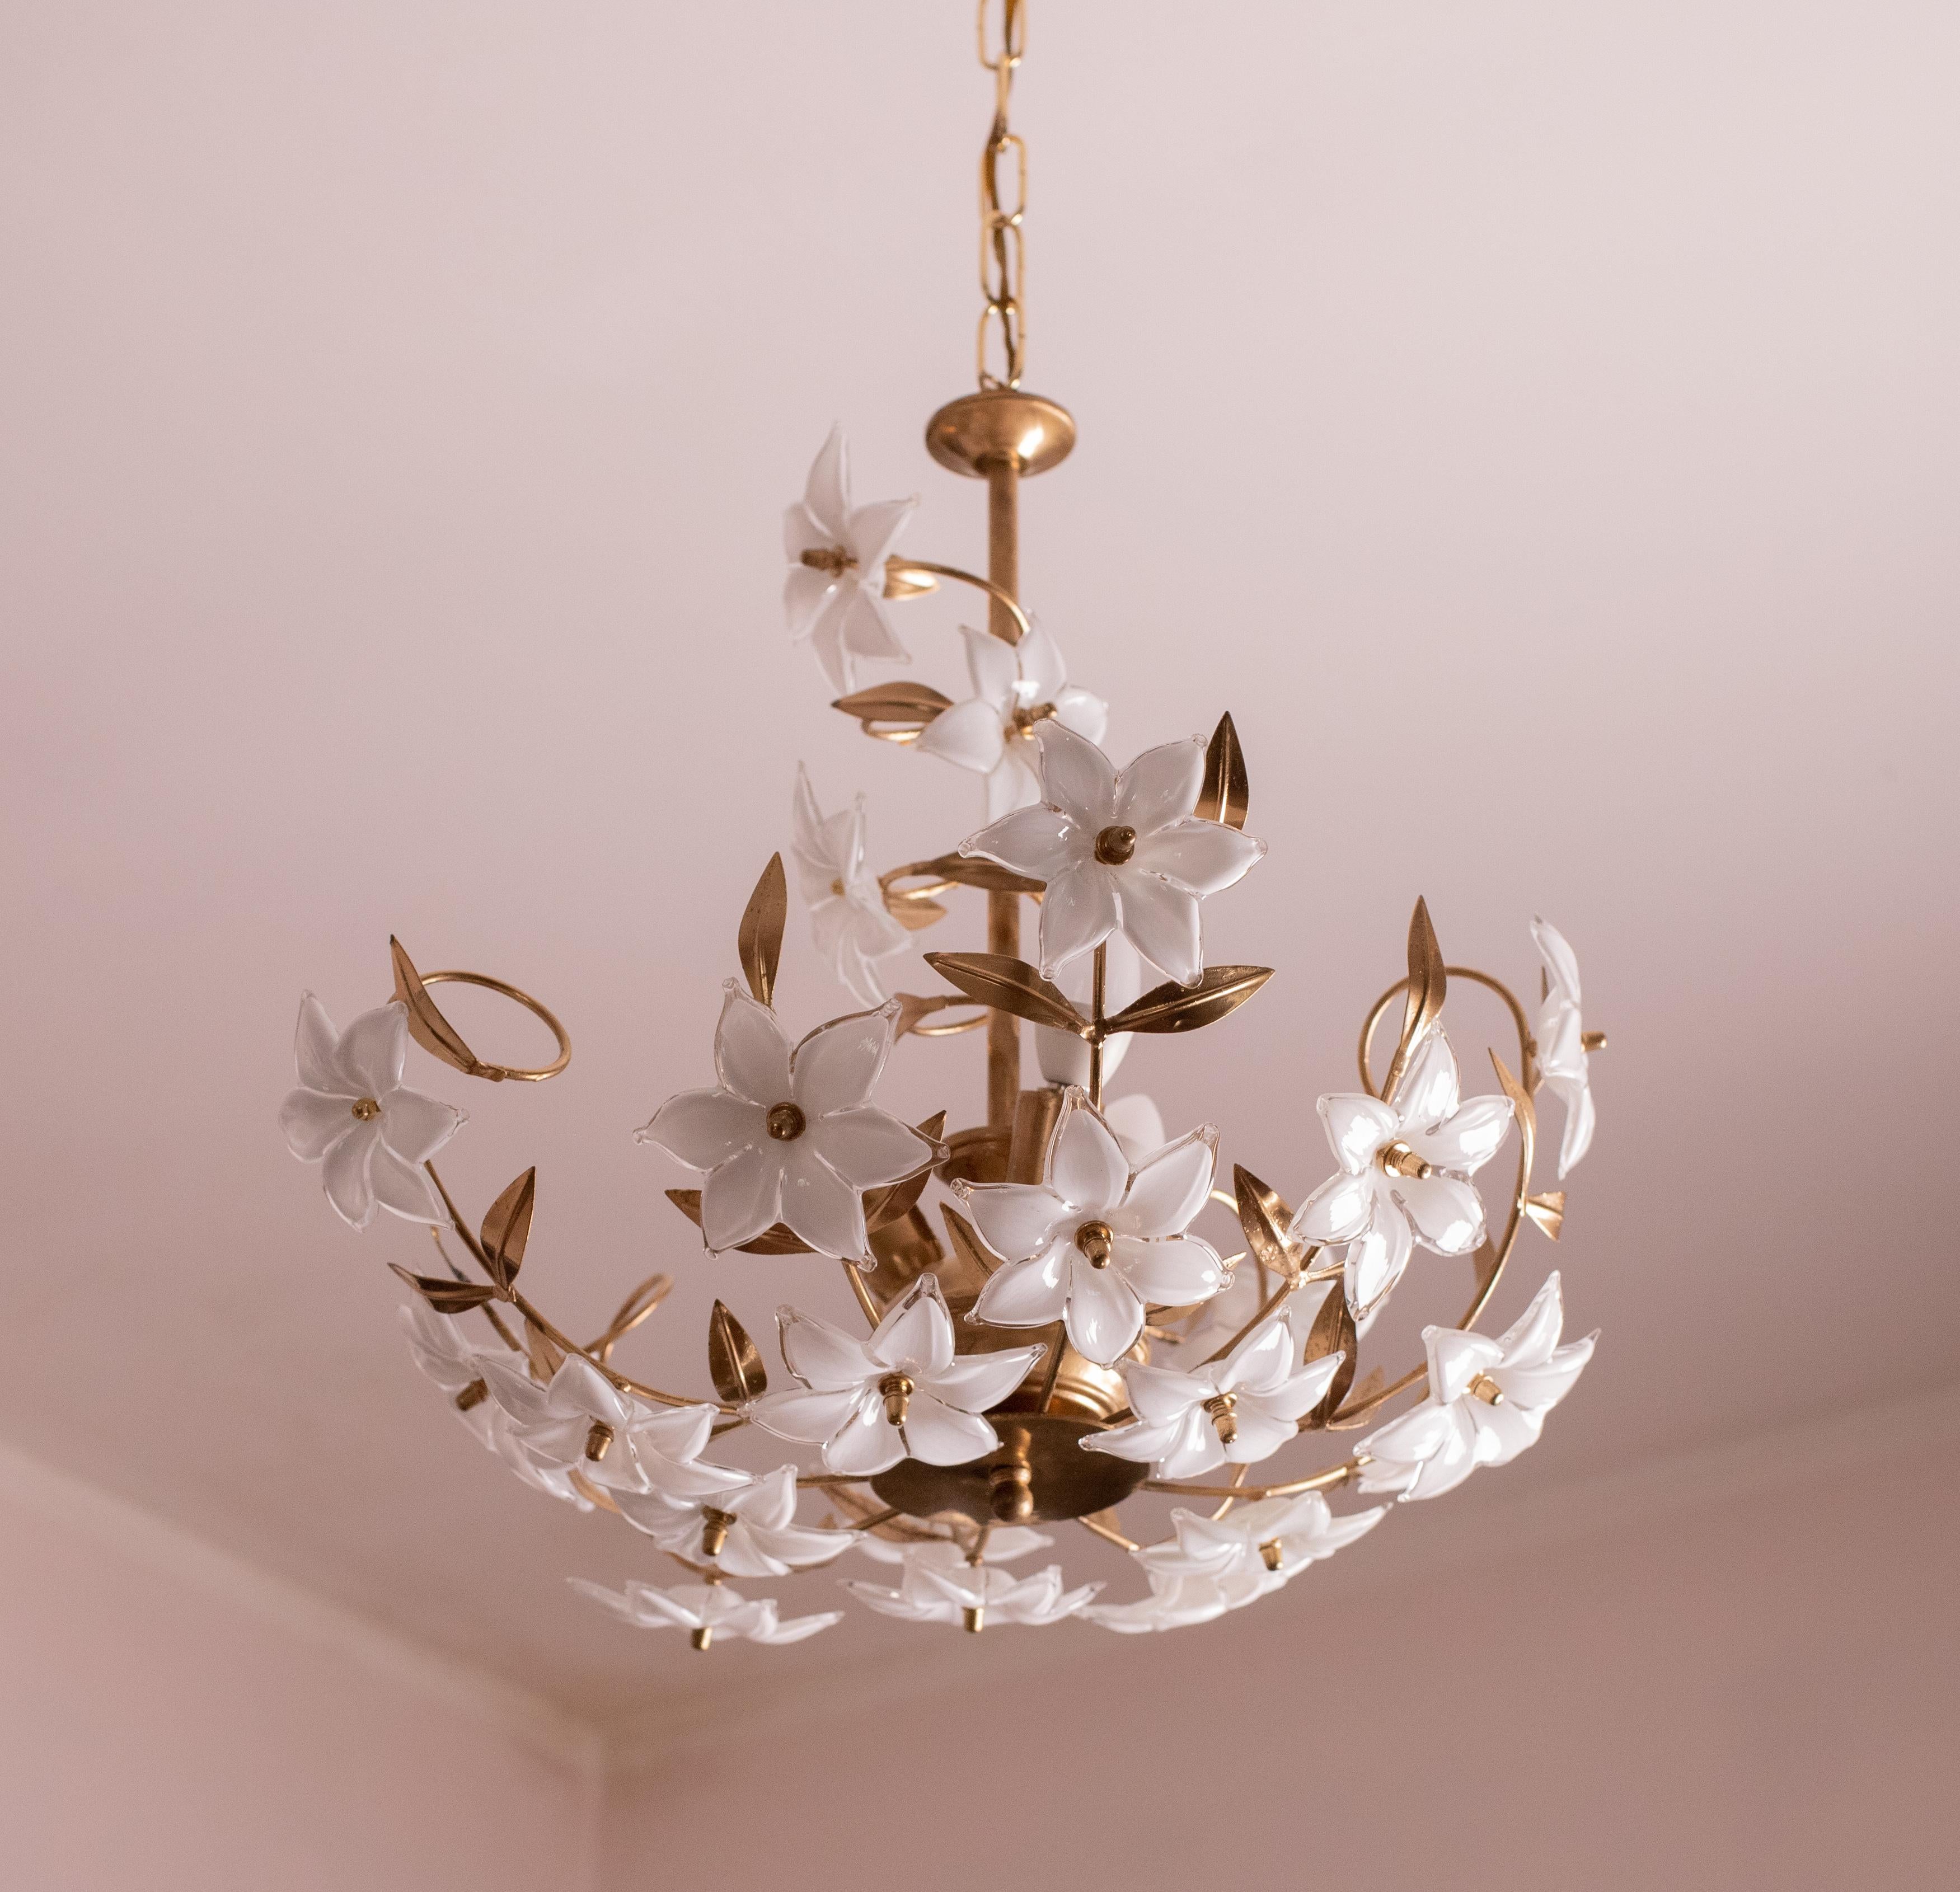 Vintage Murano glass chandelier full of white flowers.
The chandelier has 3 light points with E14 connection.
The structure is in gold bath and some signs of time are visible, giving it a certain beauty, has been restored with a gold spatter